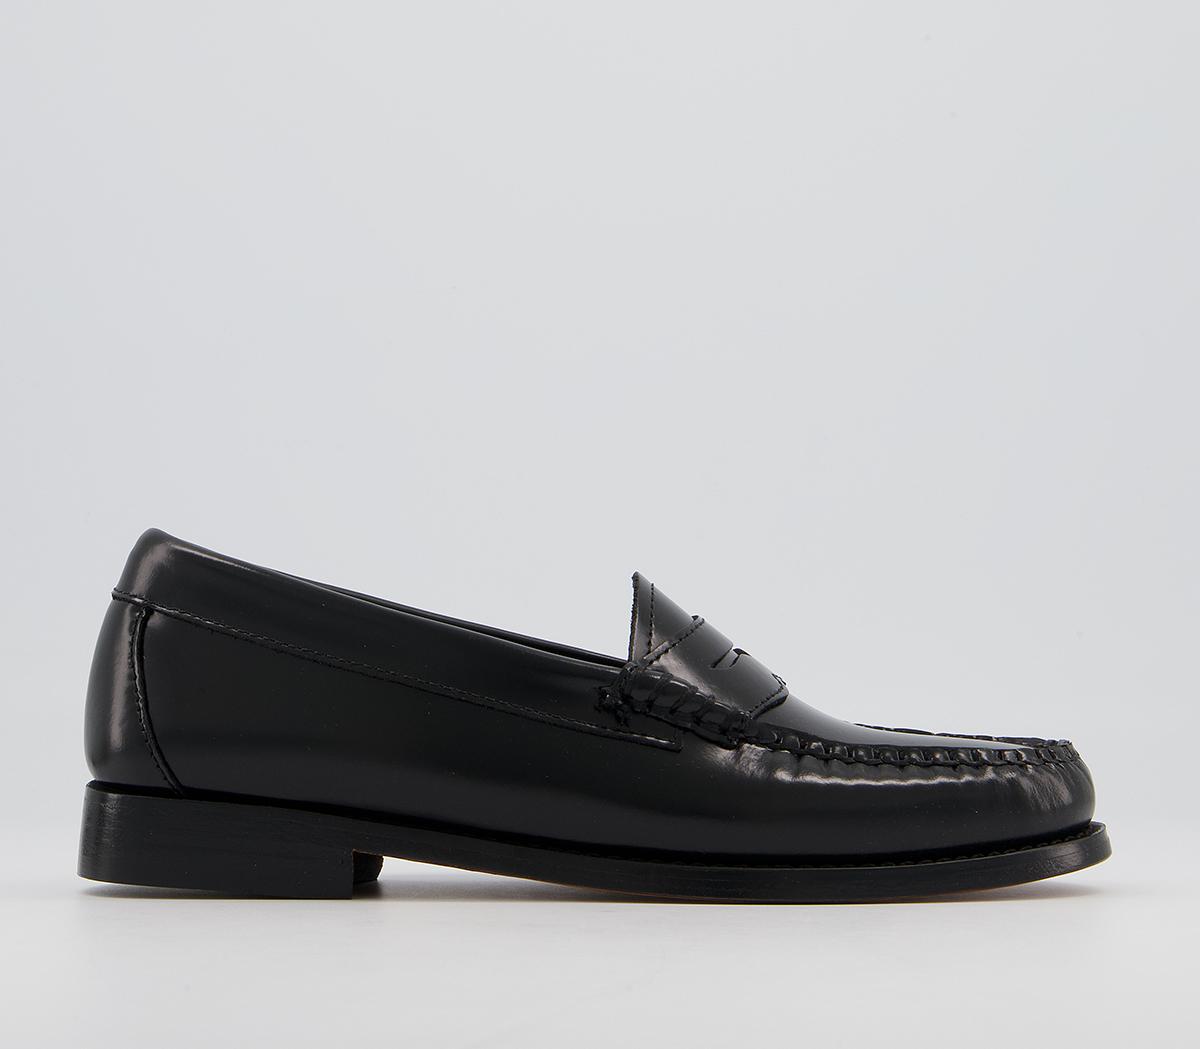 G.H Bass & Co Penny Loafers Black Leather - Flat Shoes for